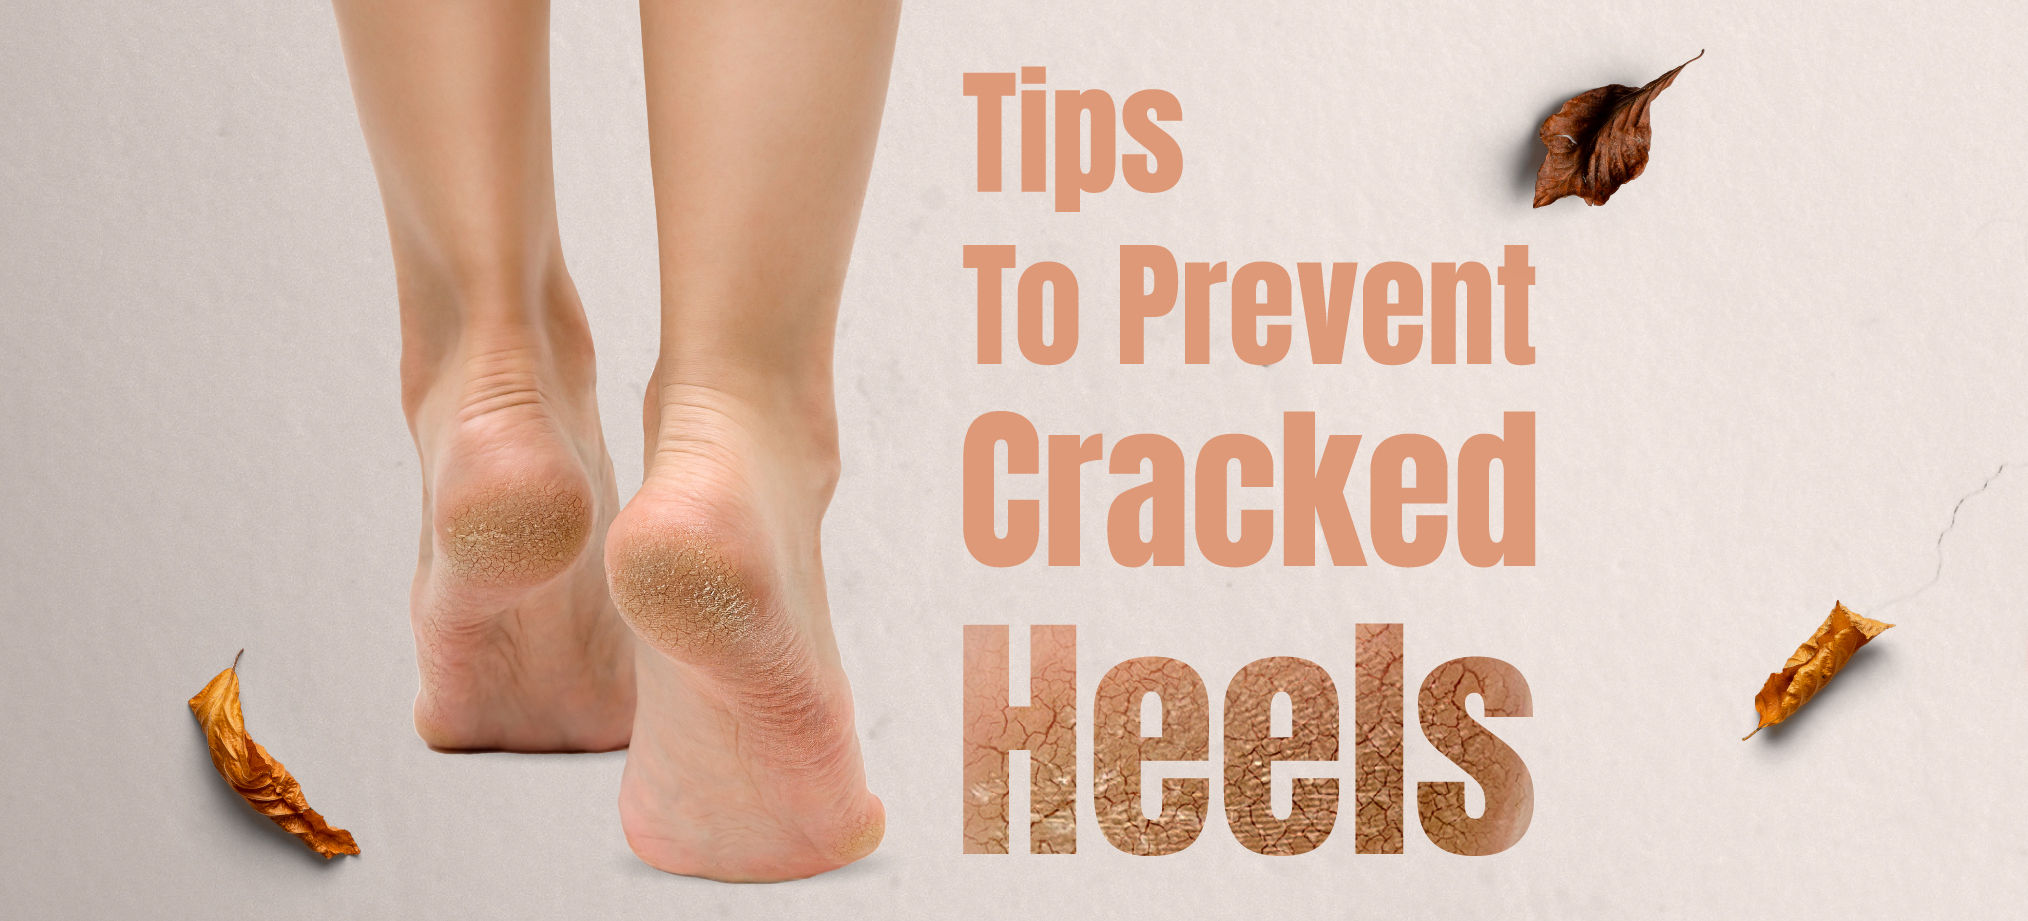 8 Proven Tips For Healing and Preventing Cracked Heels